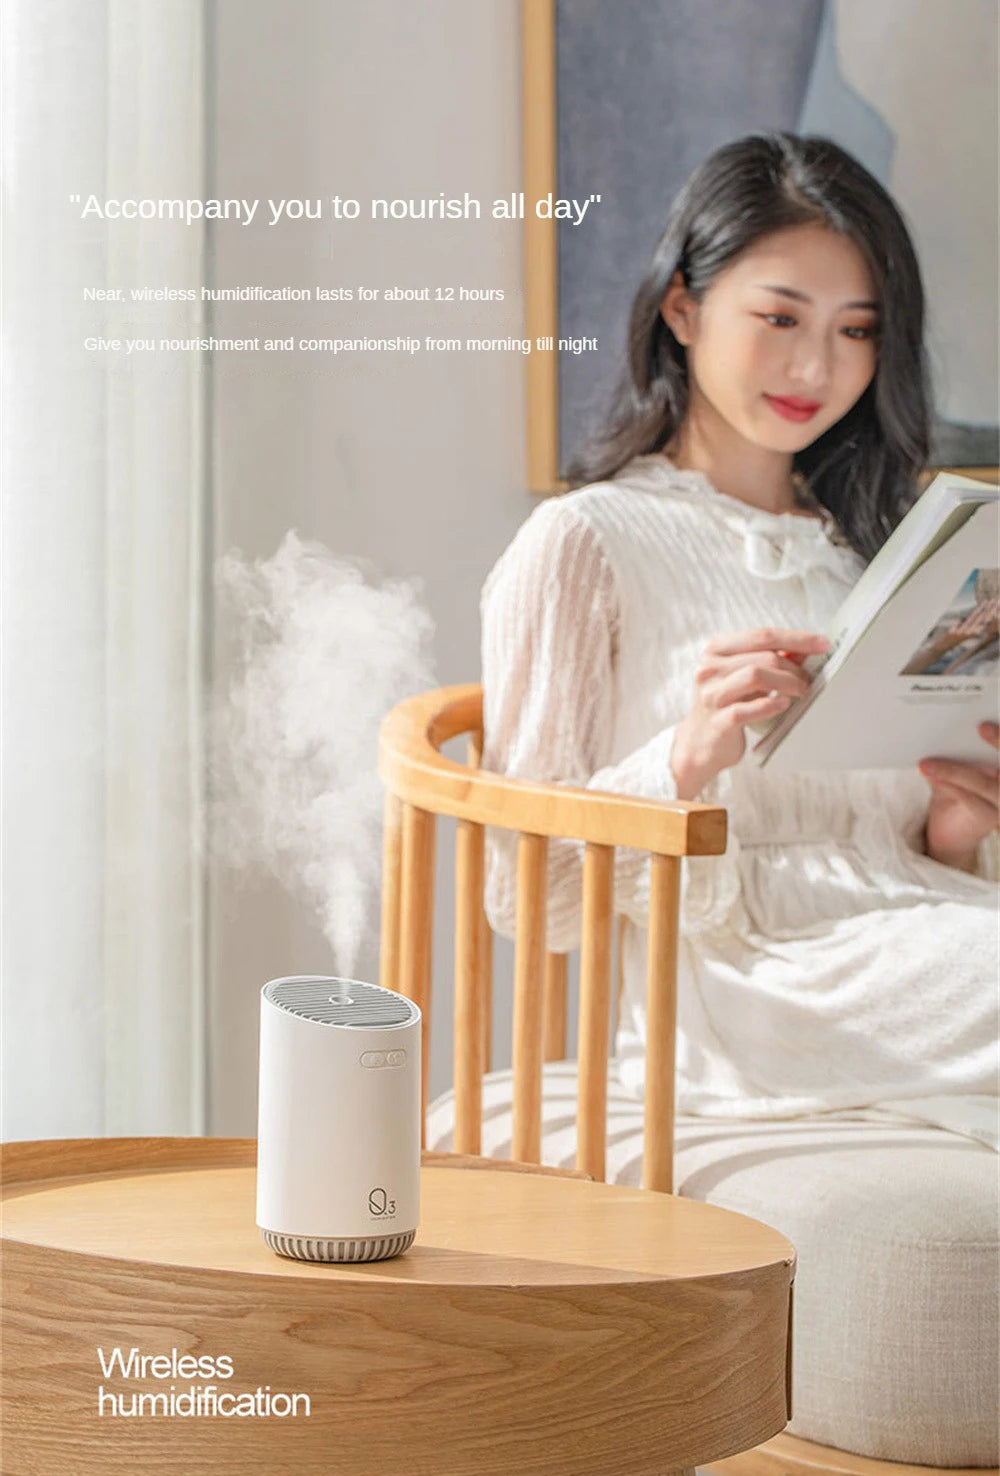 Wireless Air Humidifier With 2000mAh Battery Cool Mist Ultrasonic Electric Essential Oil Diffusers Aromatherapy Diffuser